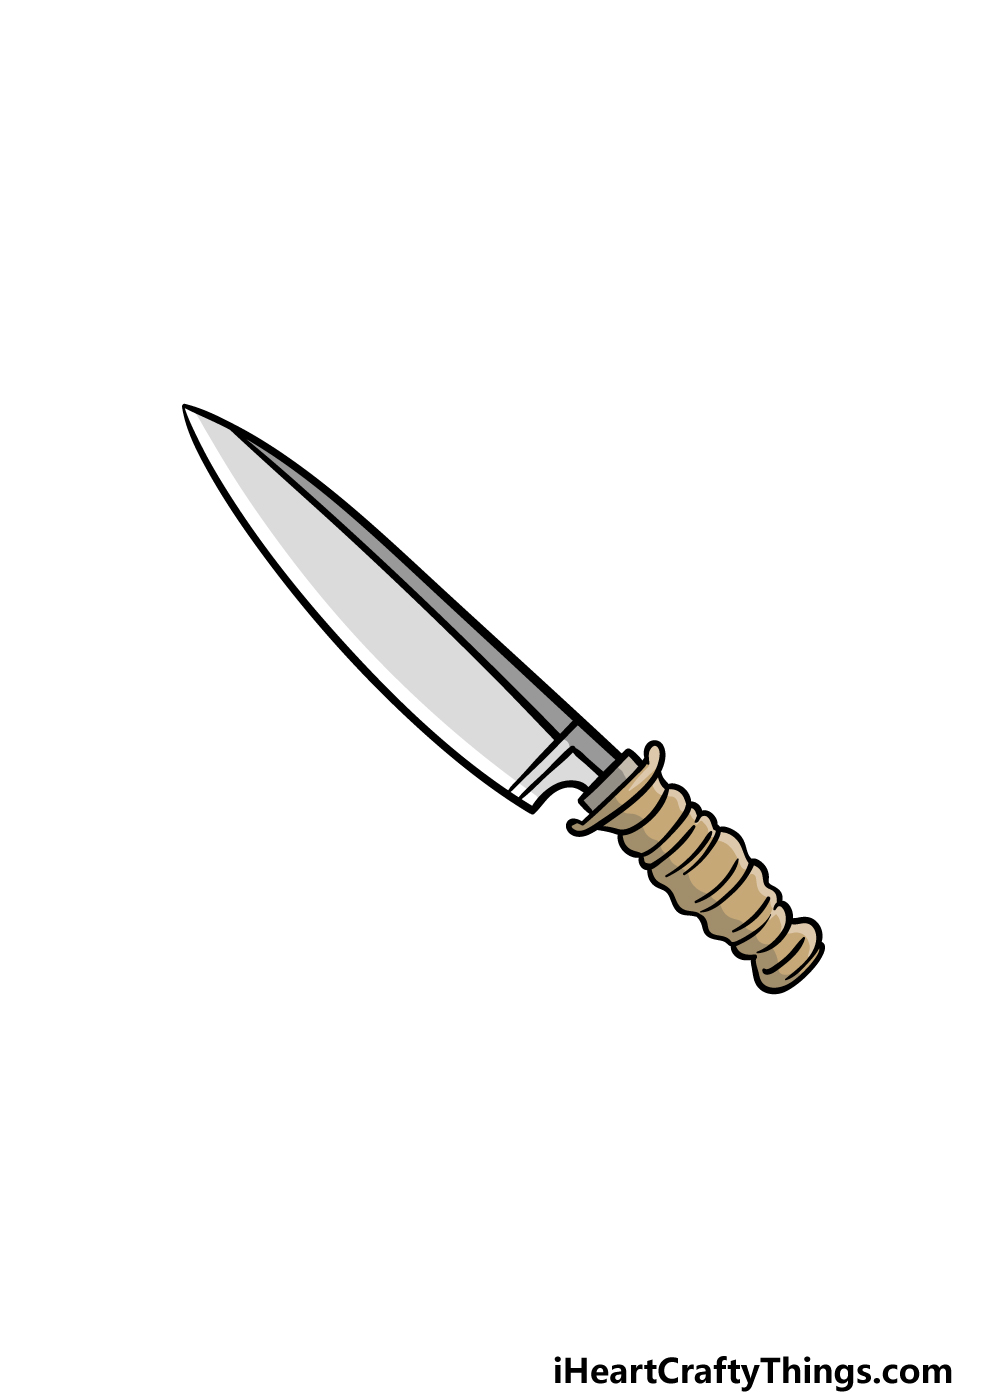 drawing a knife step 6